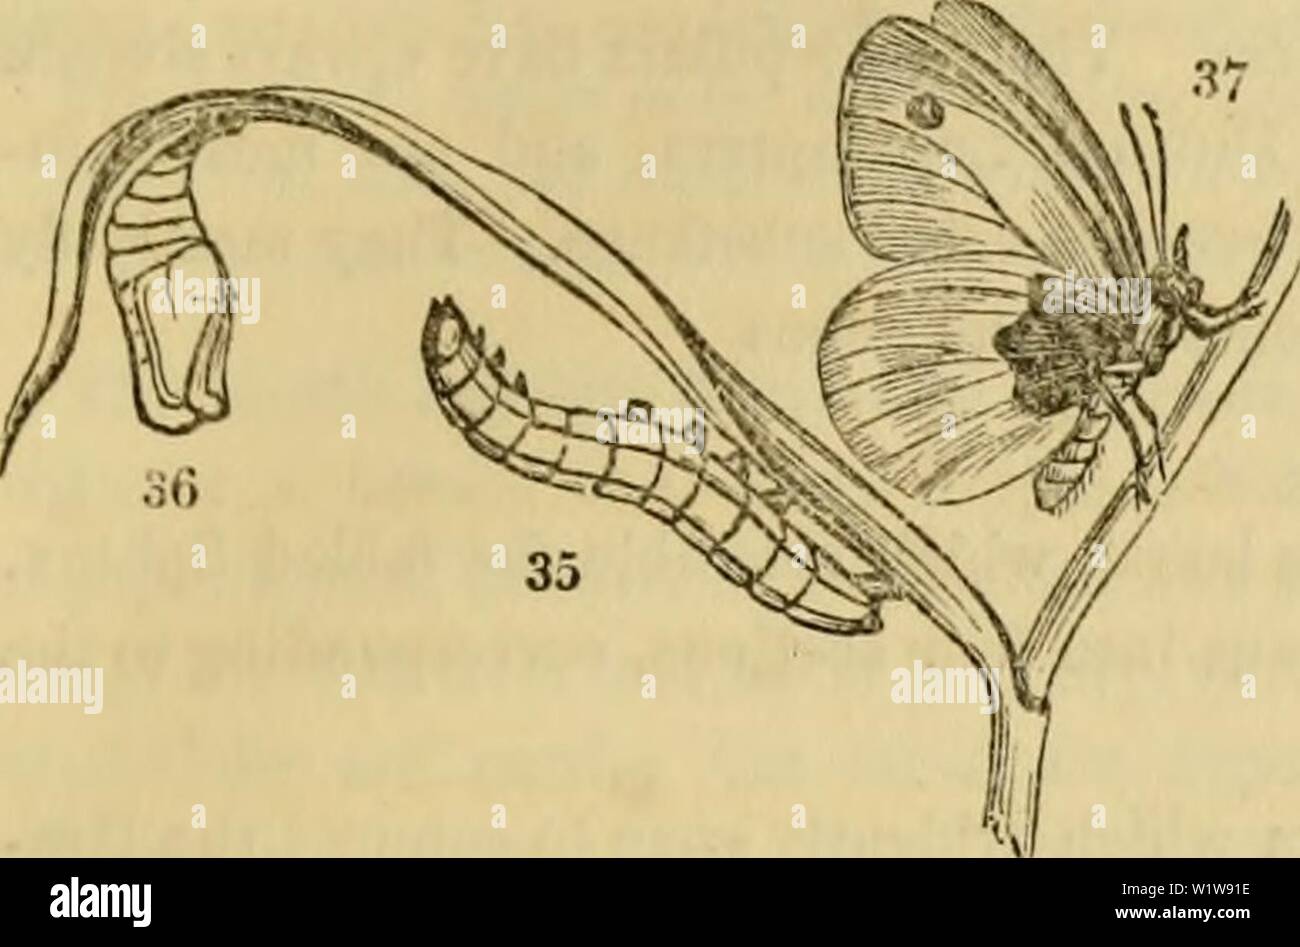 Archive Image From Page 618 Of Cuvier S Animal Kingdom Arranged Cuvier S Animal Kingdom Arranged According To